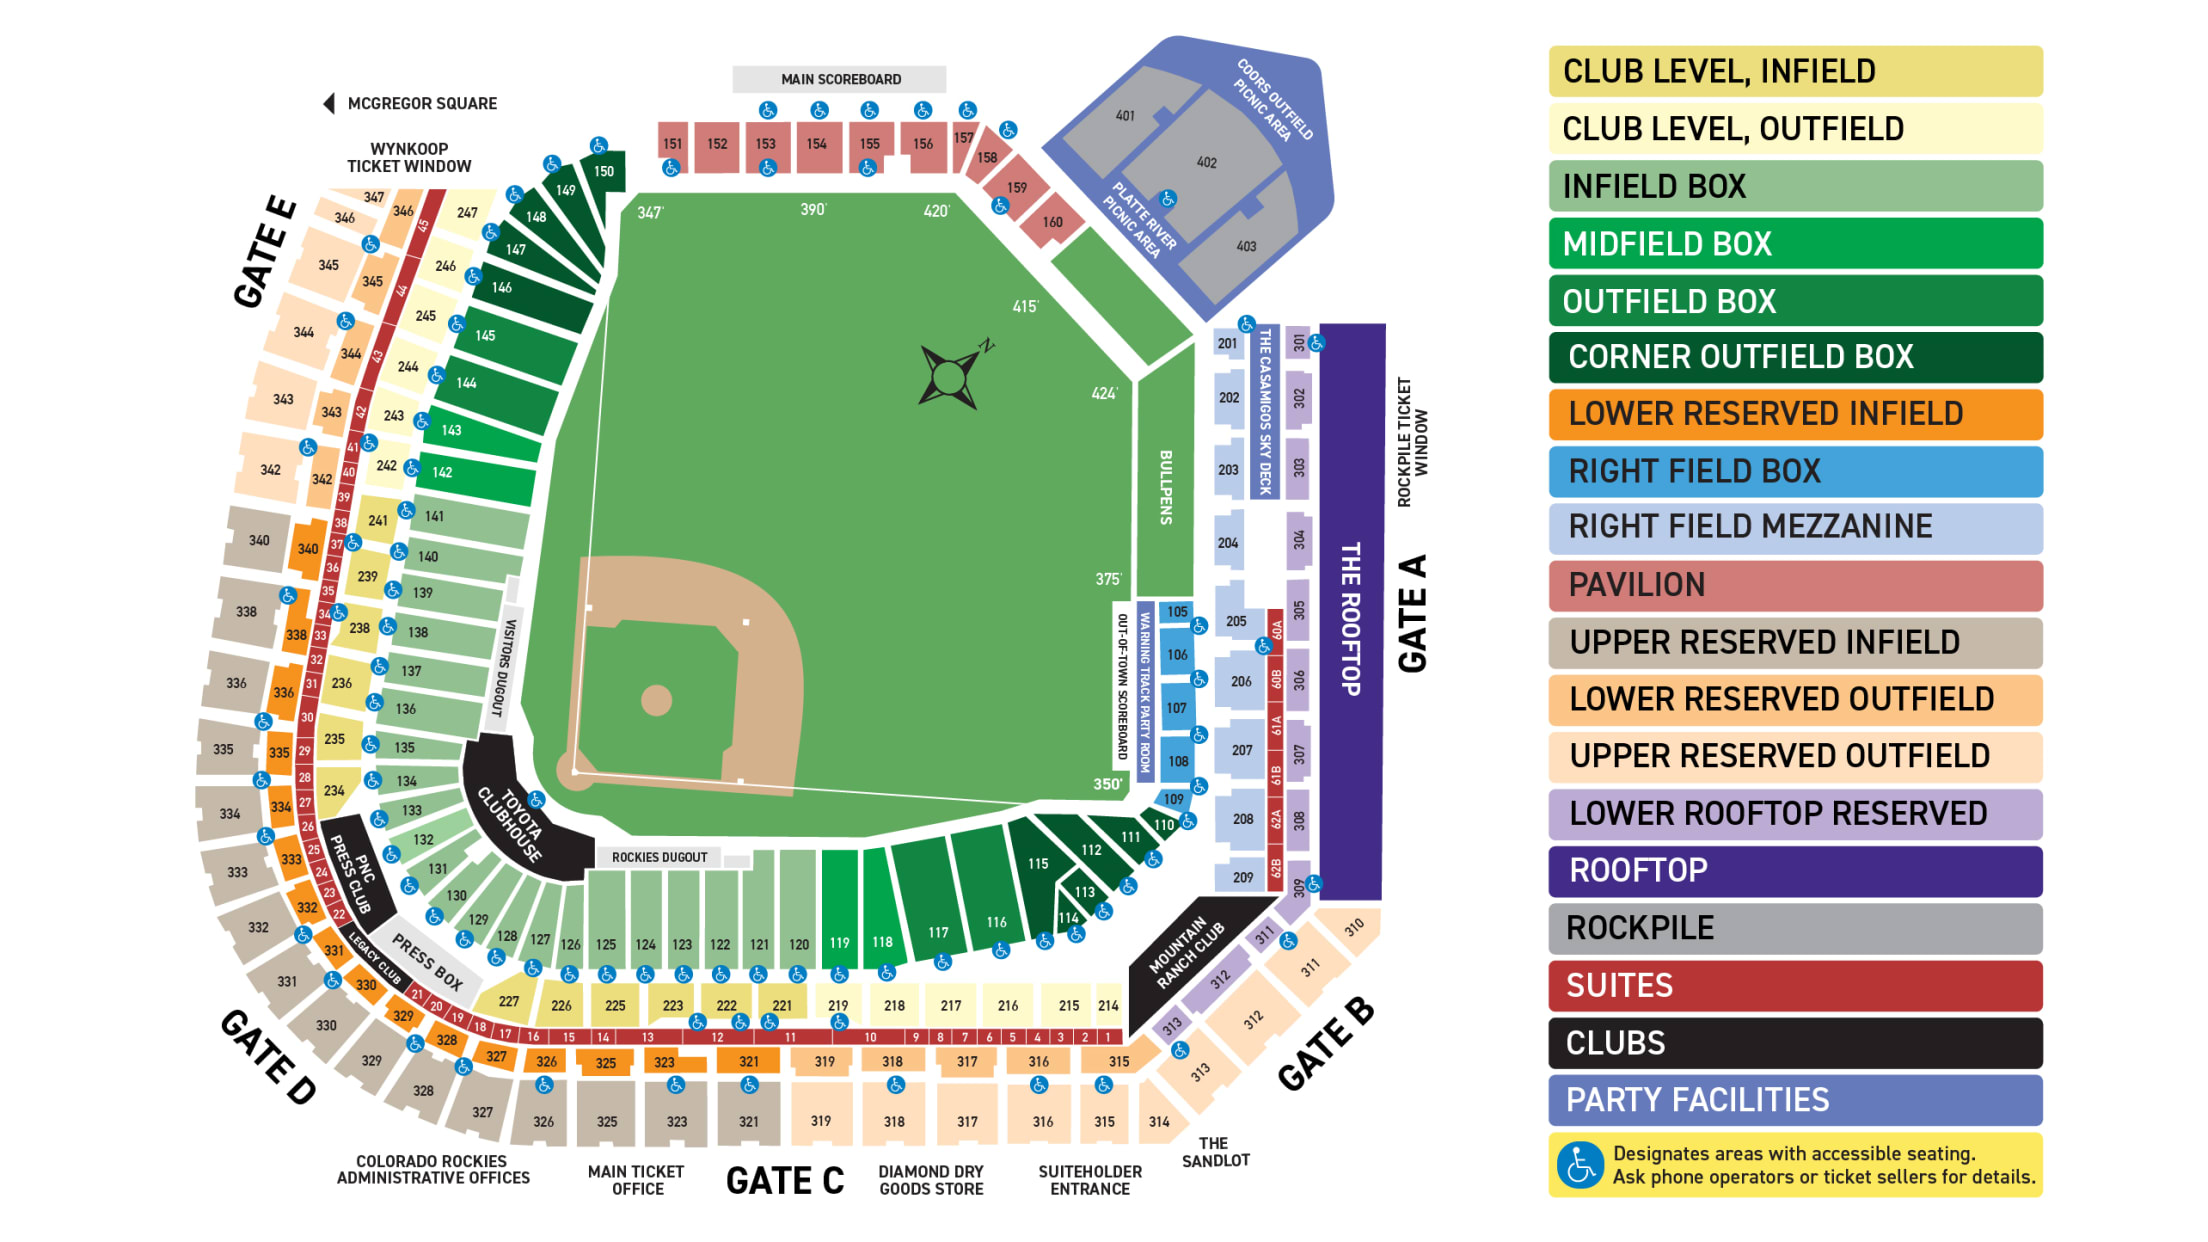 Baseball's ultimate party deck, at Coors Field - Ballpark Digest